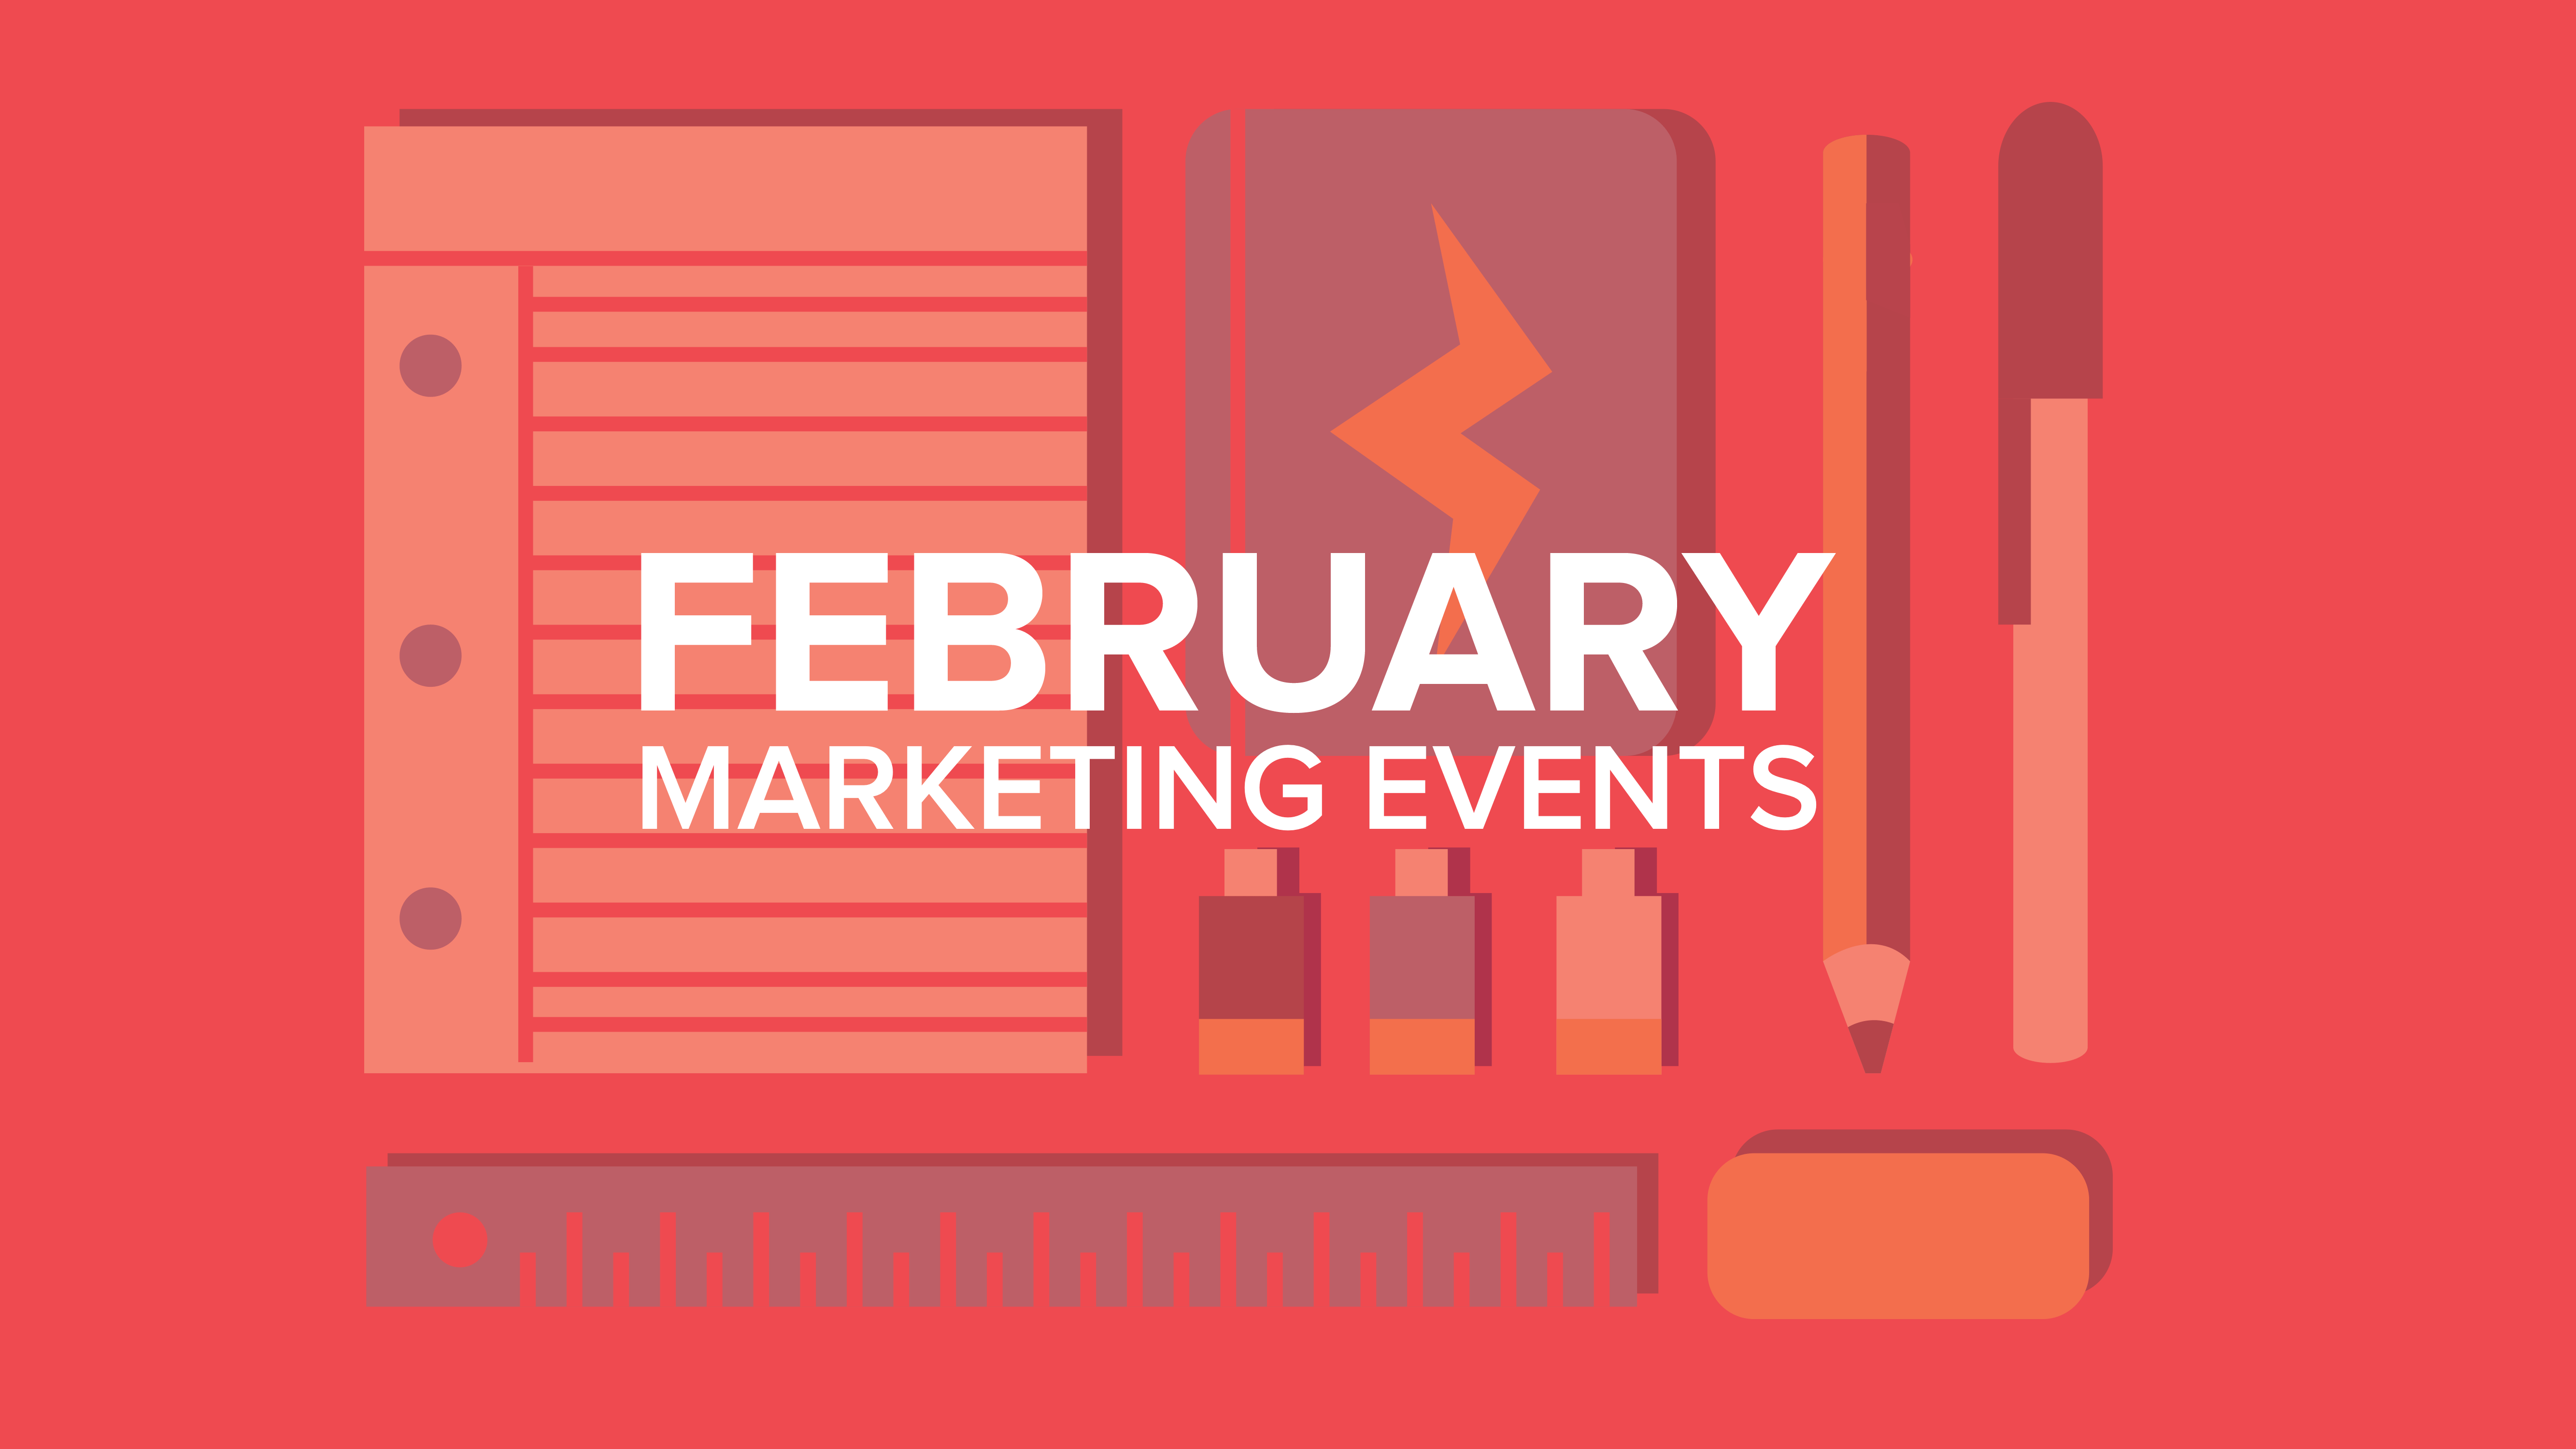 February 2015 Marketing and Design Events in St. Louis